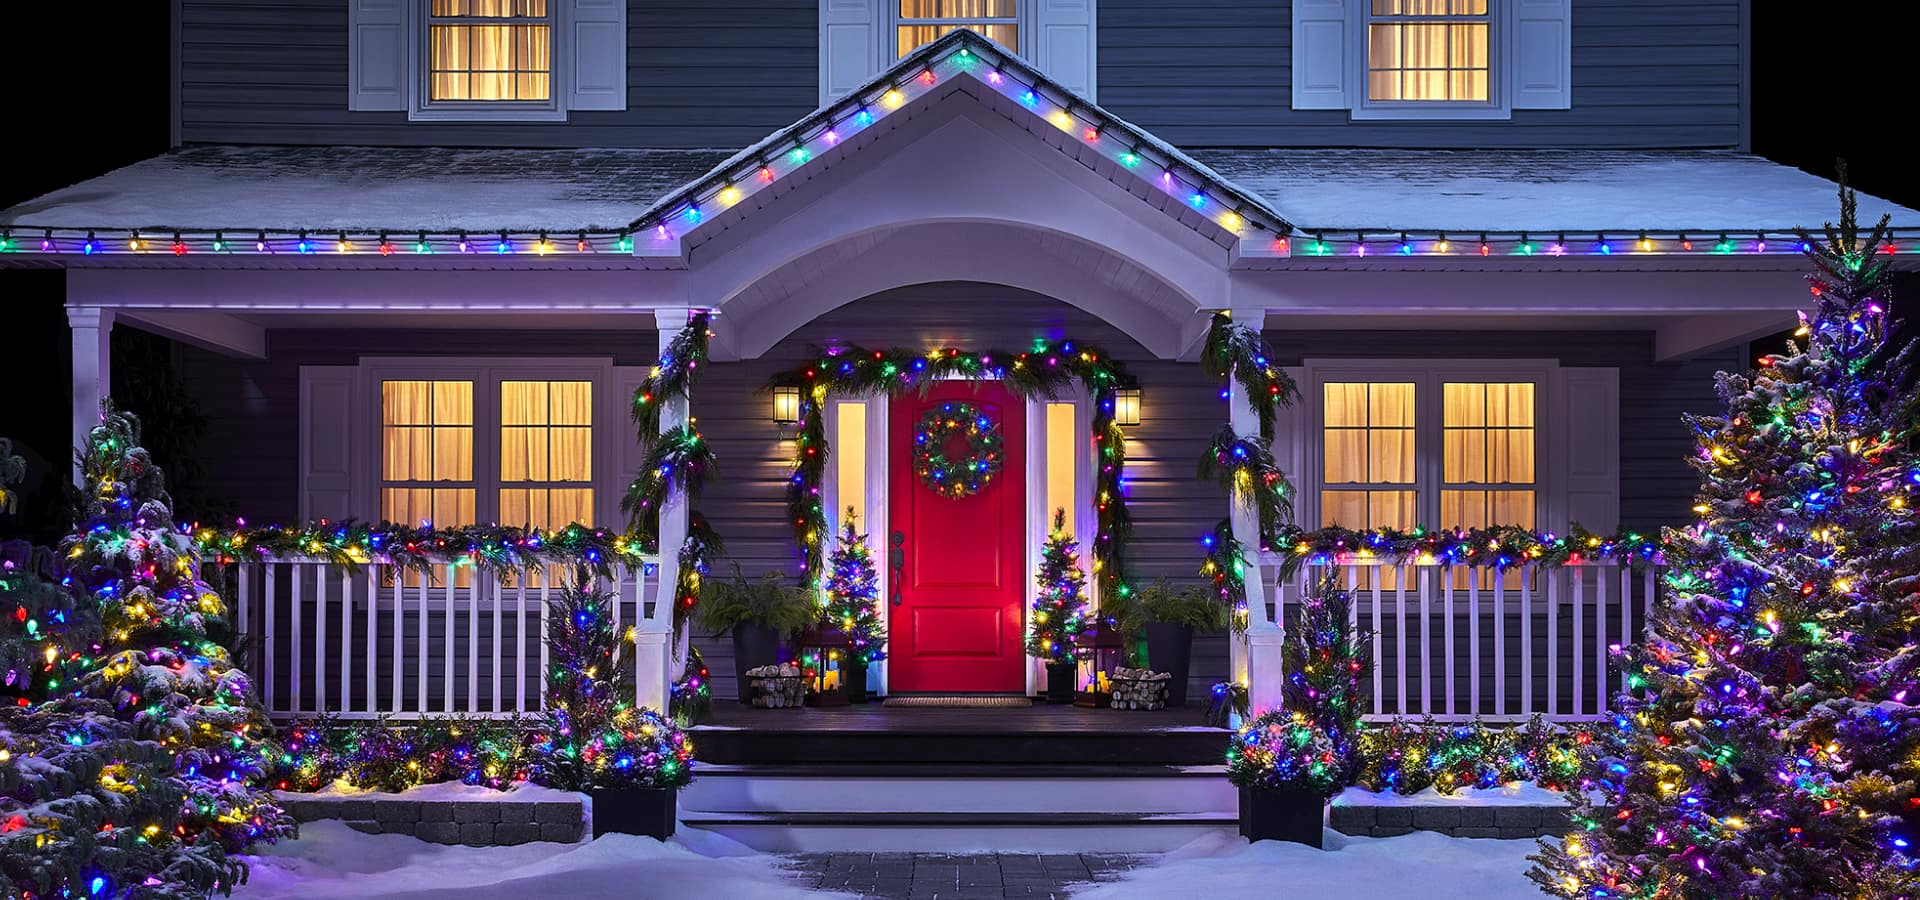 Exterior of a home decorated with Christmas decorations and colourful lights